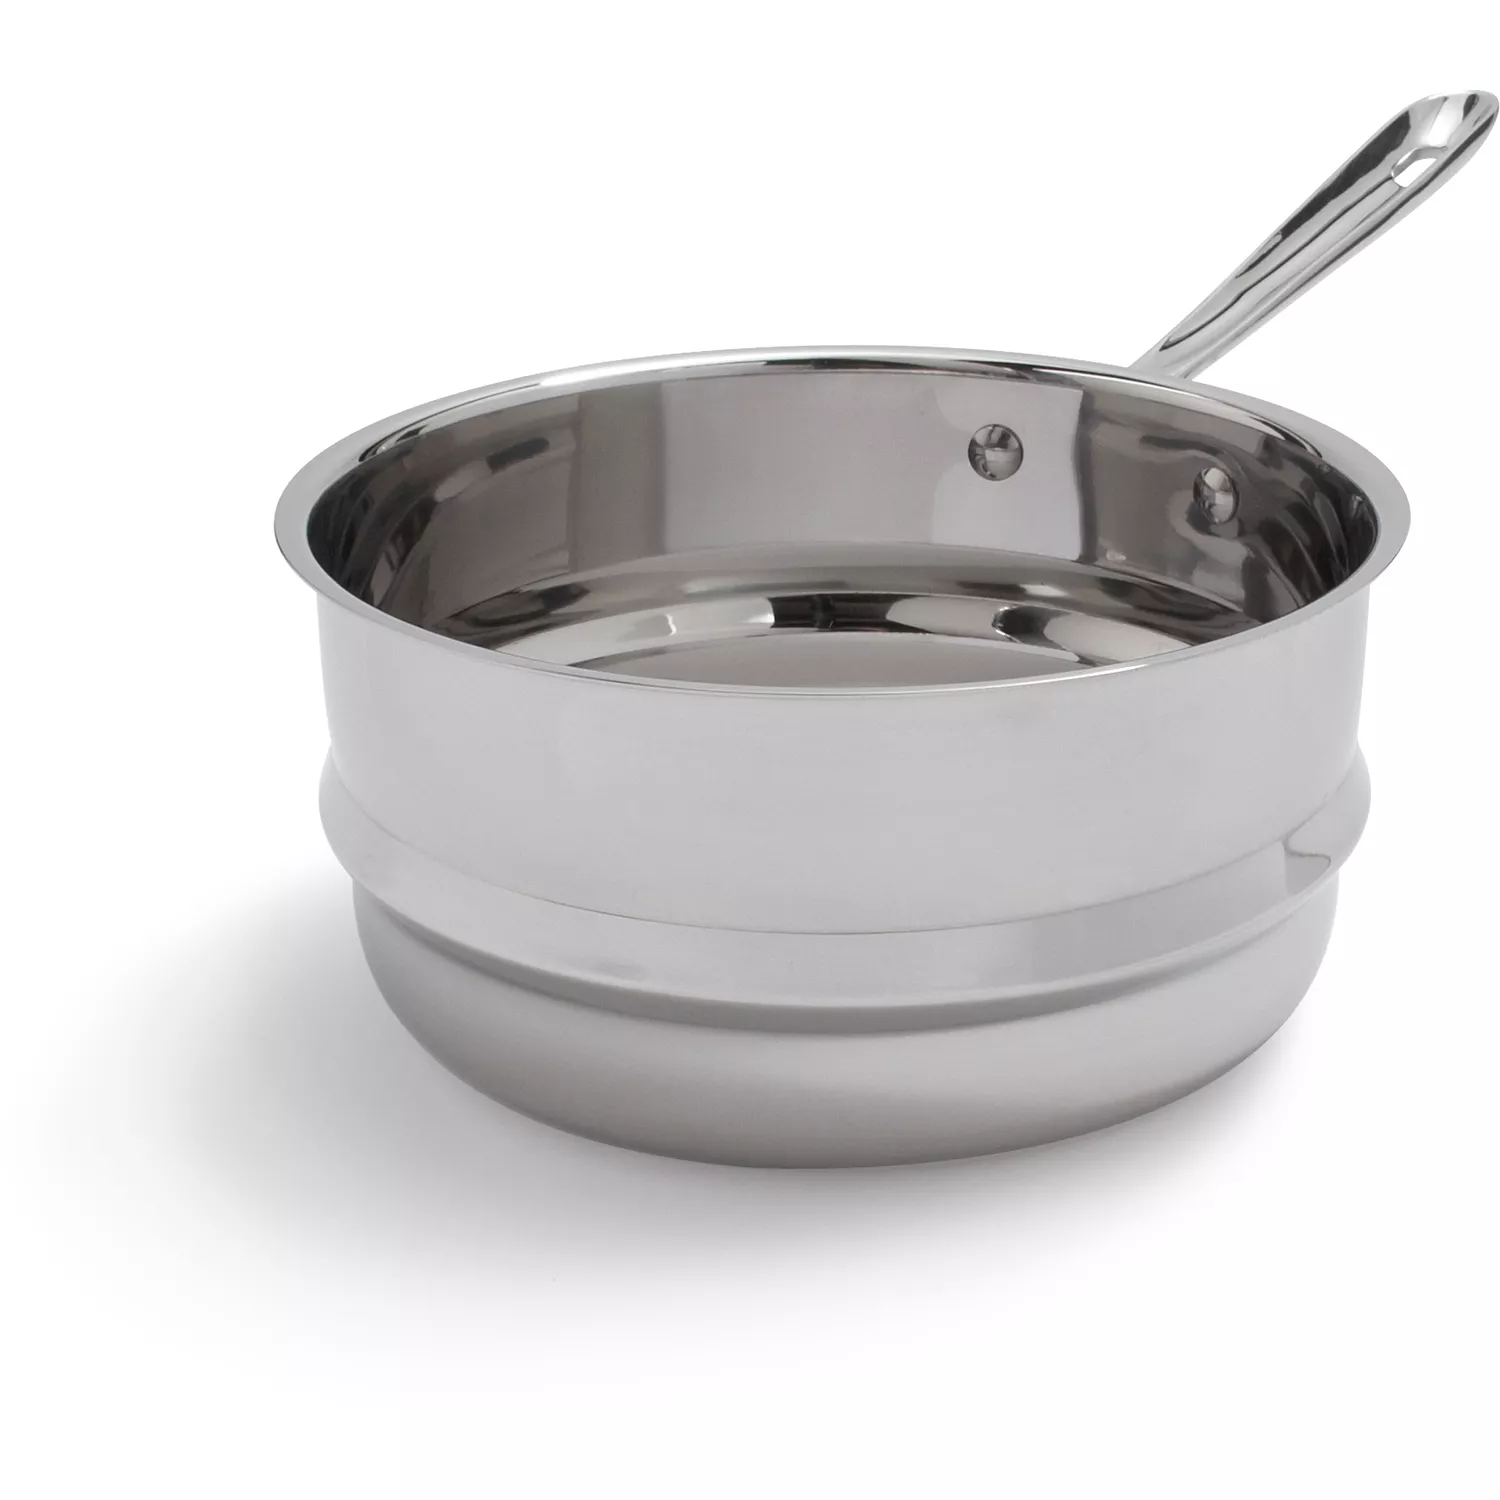 Stainless Steel Double Boiler with Cover